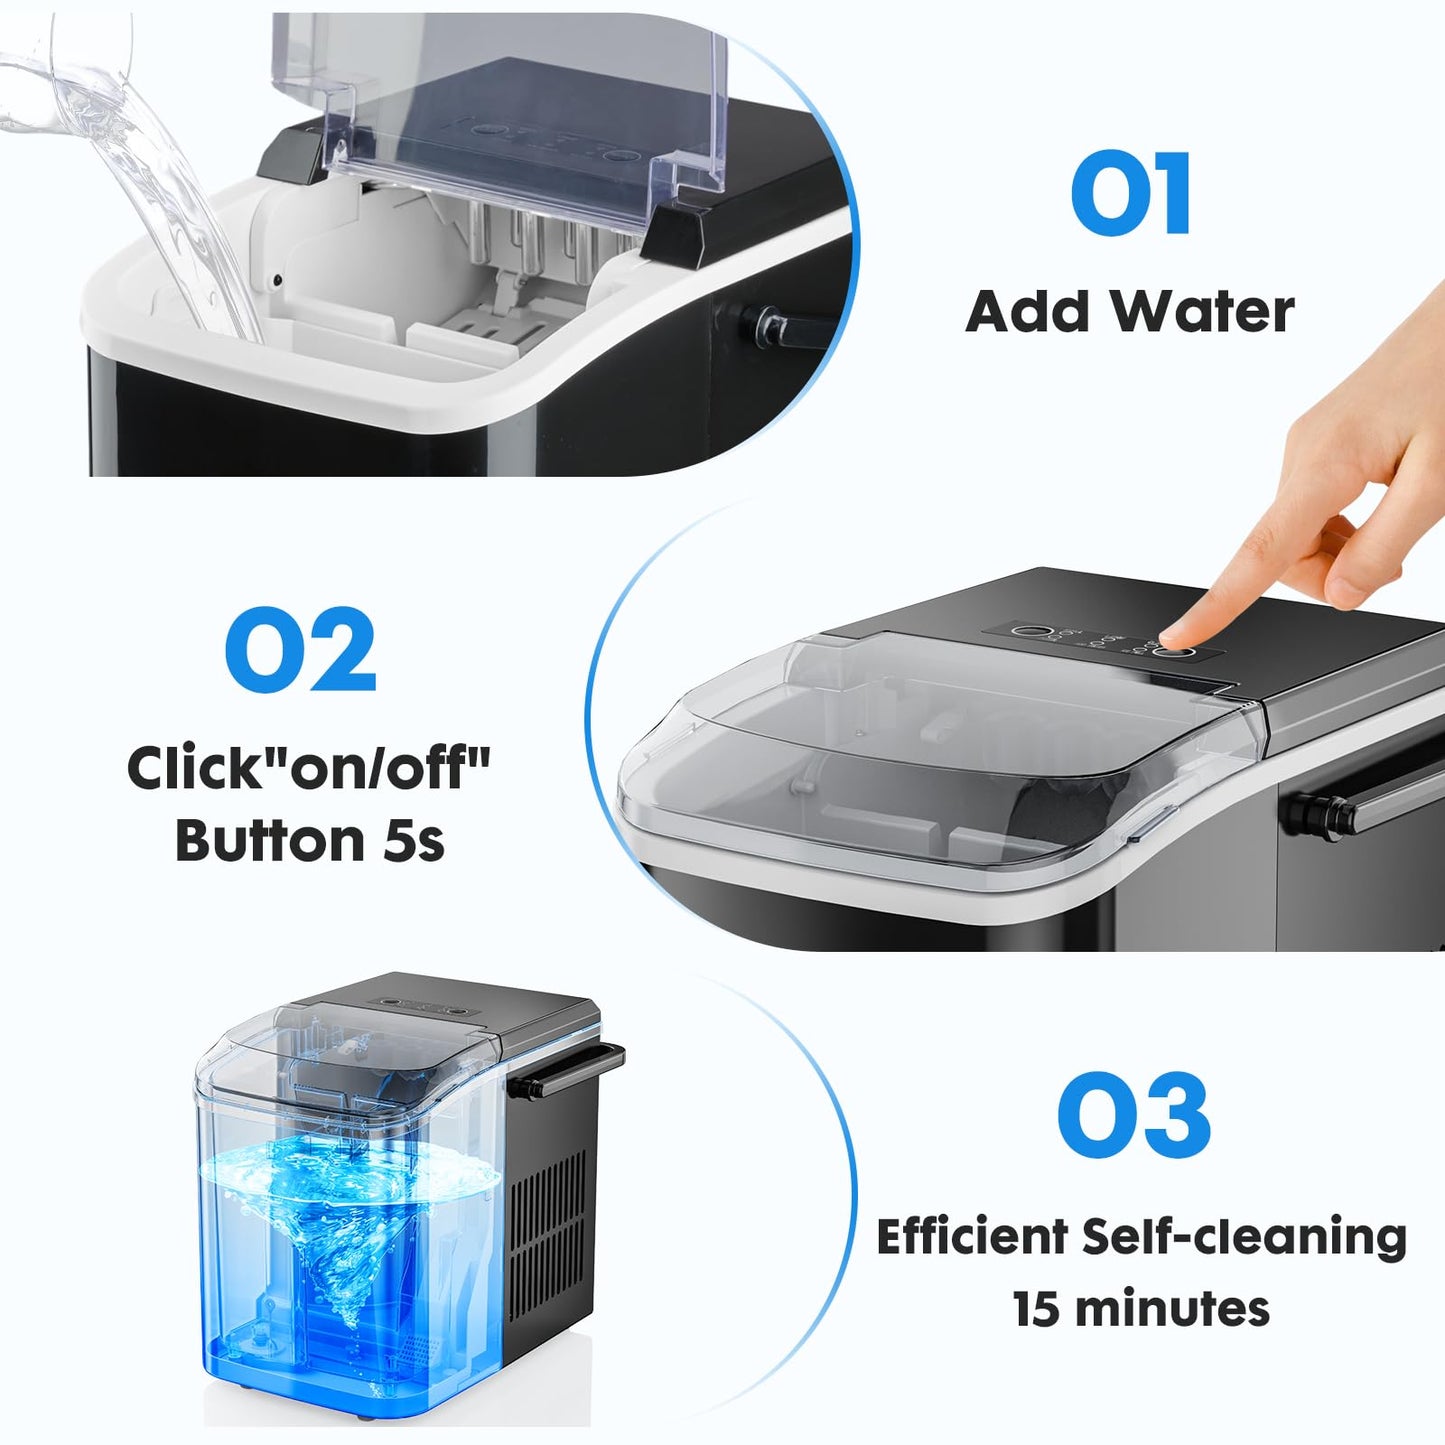 ZUNMOS Countertop Ice Maker, 9 Cubes in Only 6 Minutes, 26.5lbs Per Day, Portable Ice Machine Self-Cleaning, with Scoop Basket and Convenient Handle, for Home Kitchen Party and Office, Black